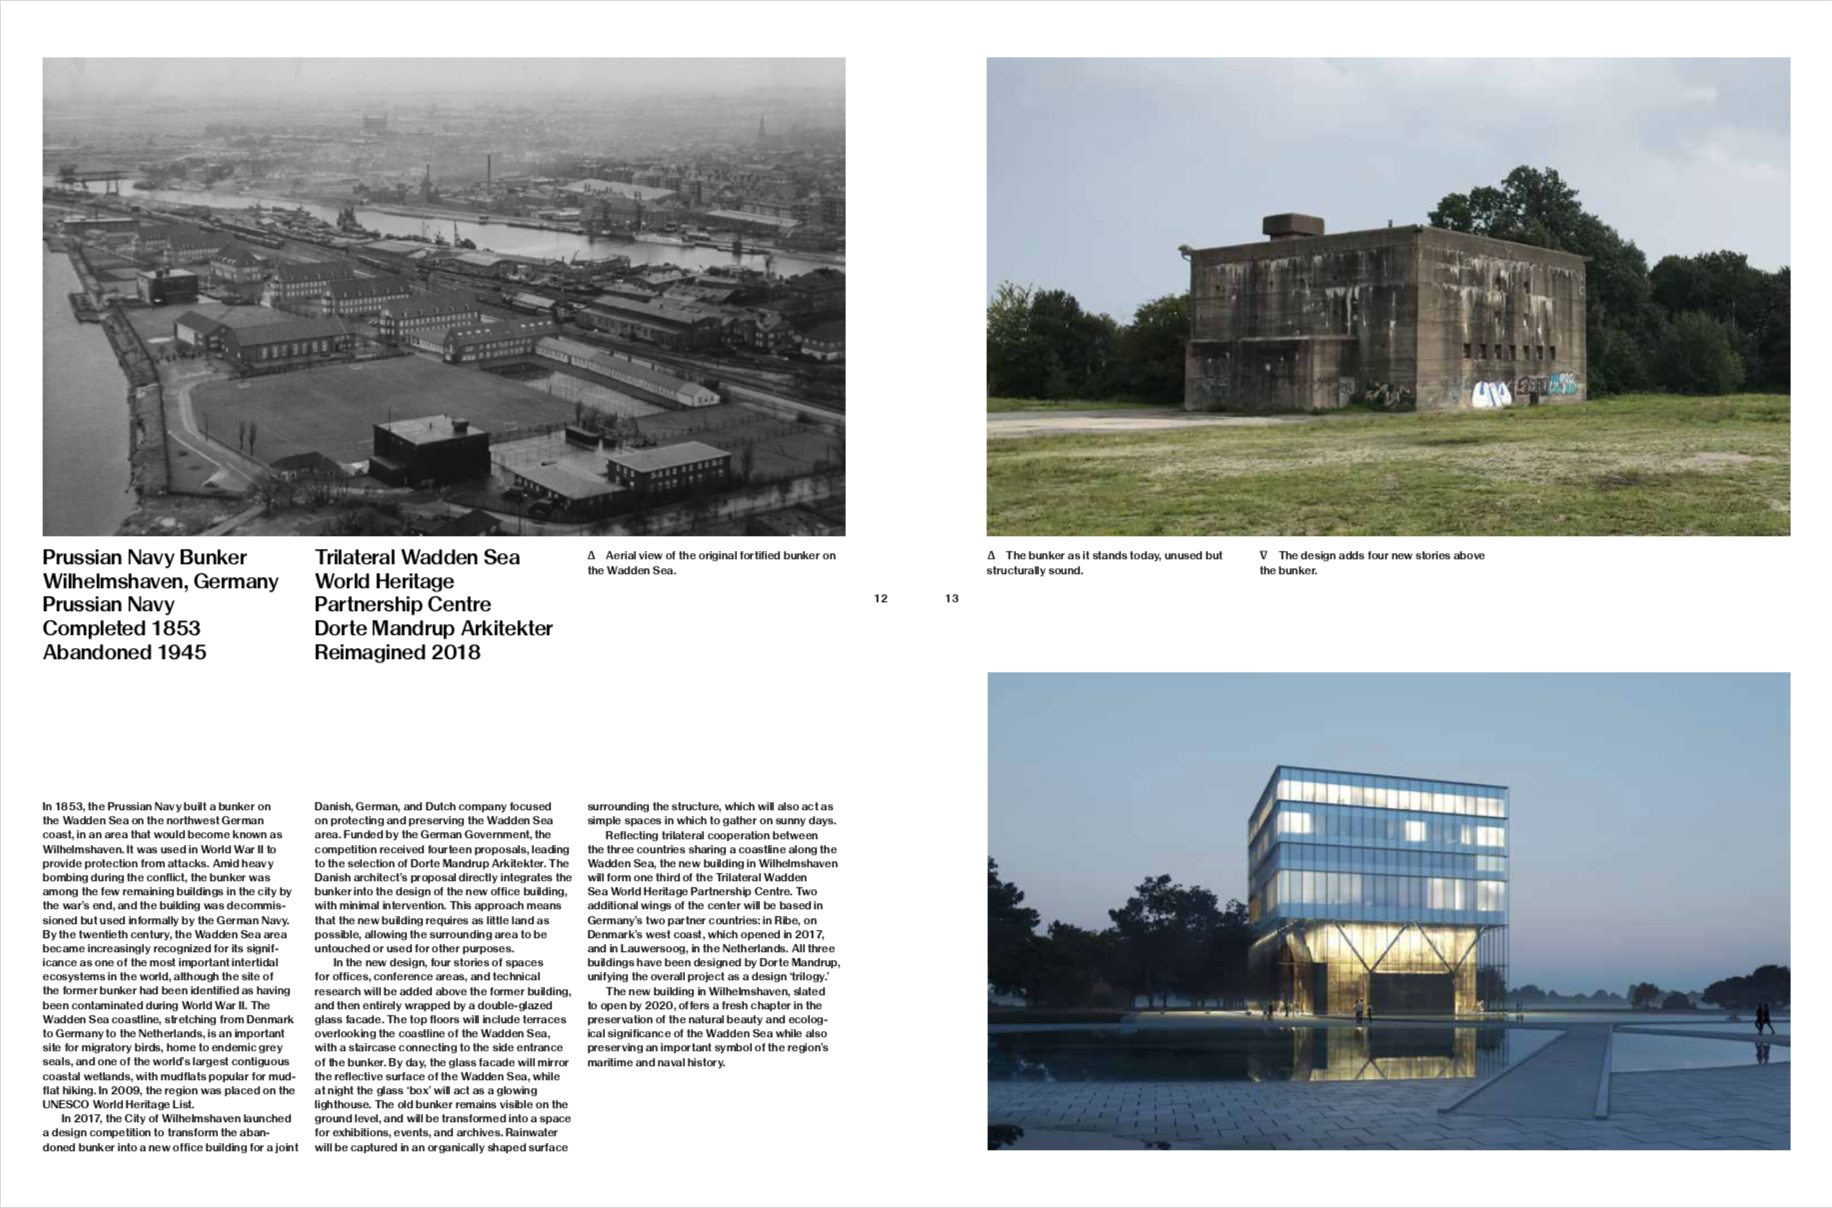 By Dan Barasch from Ruin and Redemption in Architecture copyright Phaidon 2019